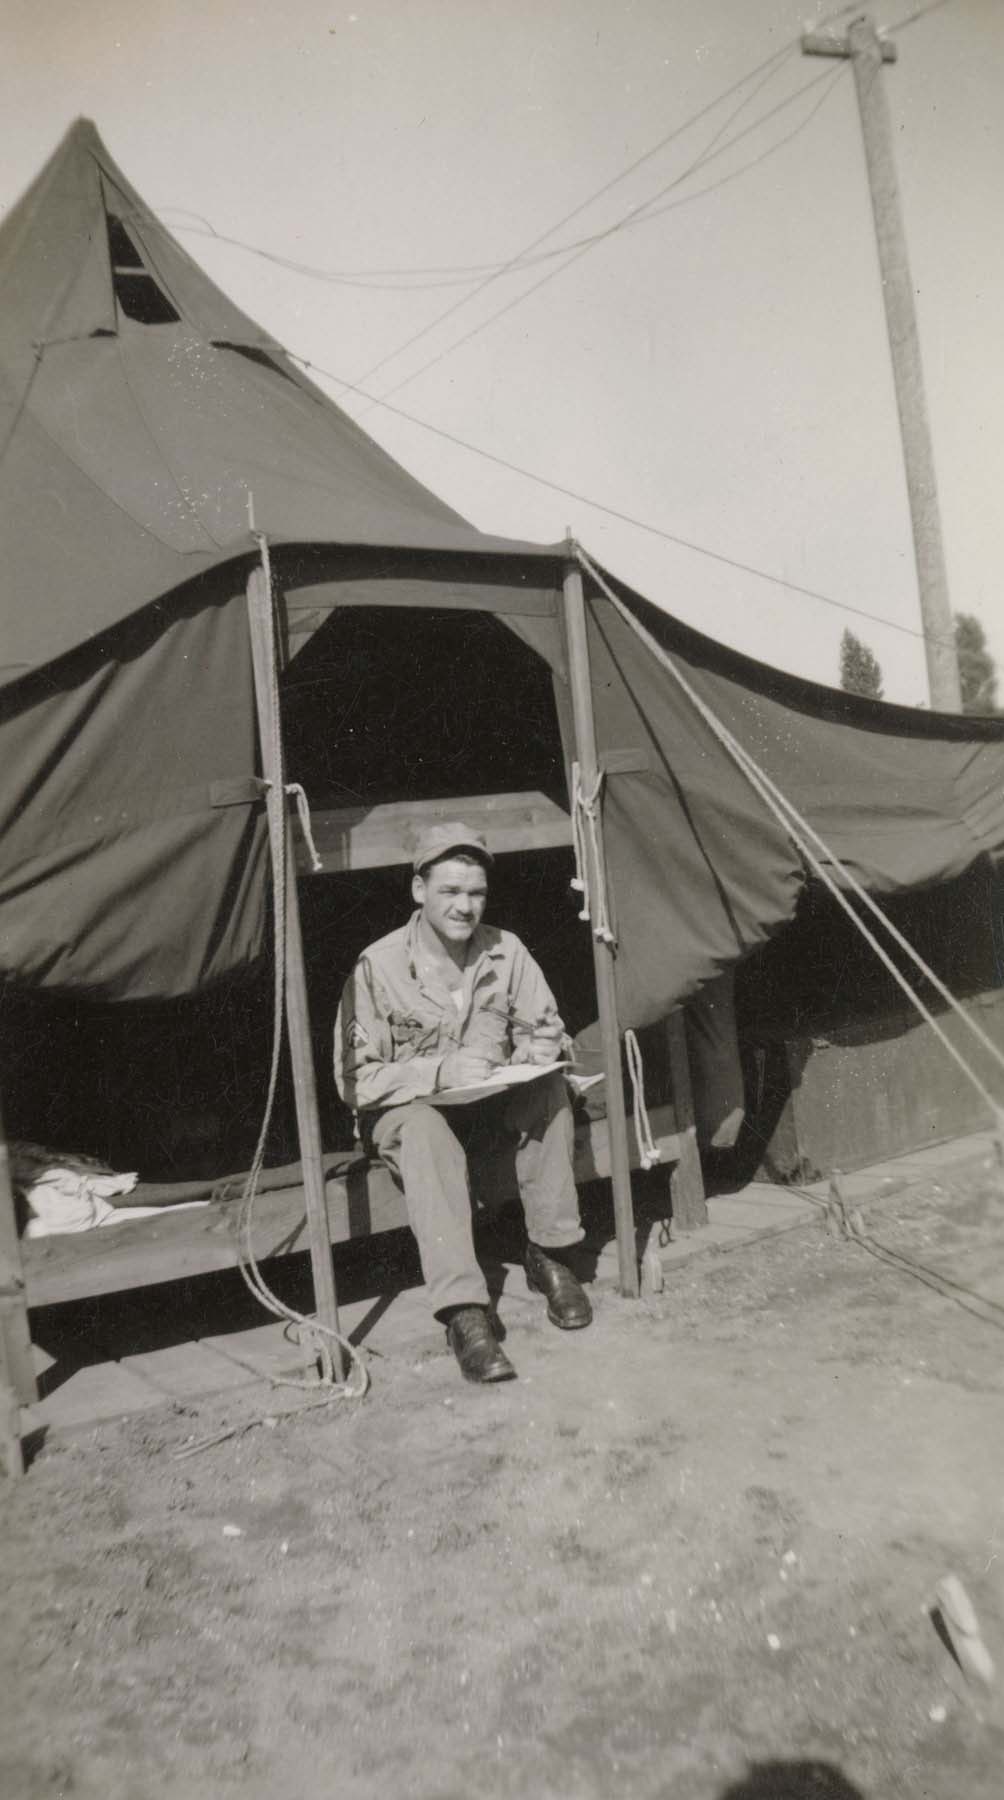 A black-and-white photograph of artist Charles T. Williams sitting and drawing in the opening of a military tent.